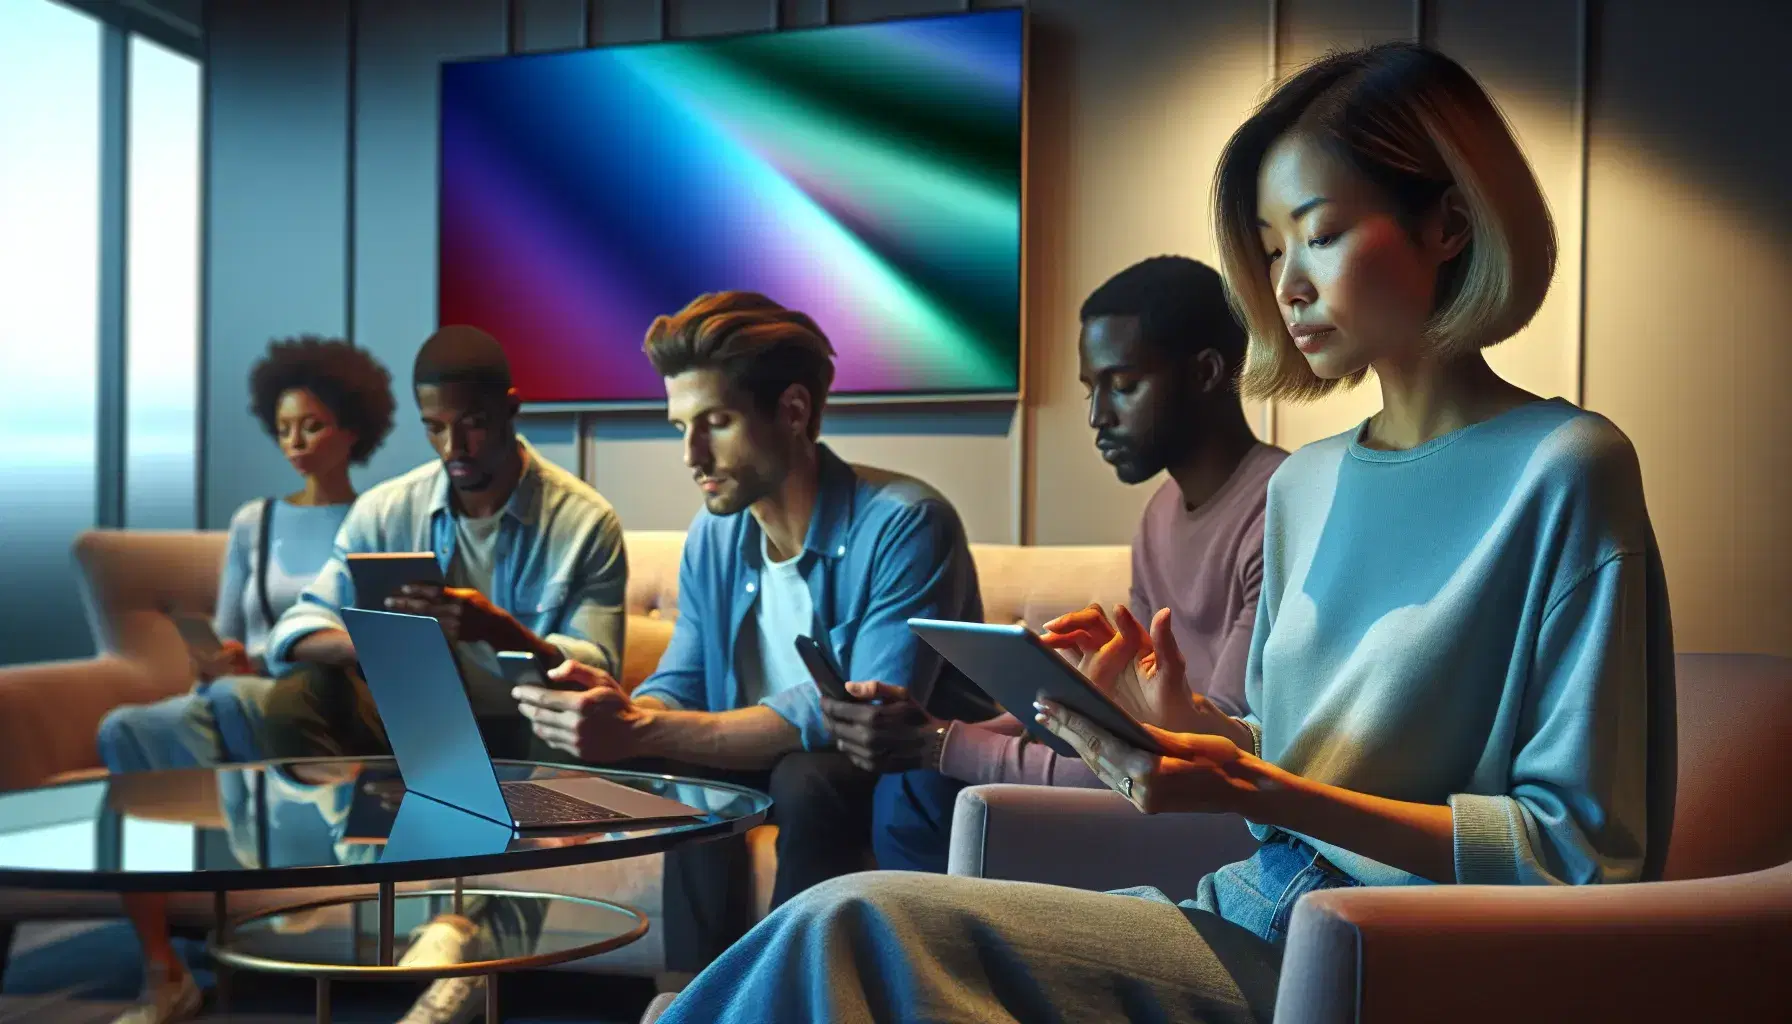 Multicultural group engrossed in using electronic devices in a modern room with soft lighting and colorful flat screen TV.